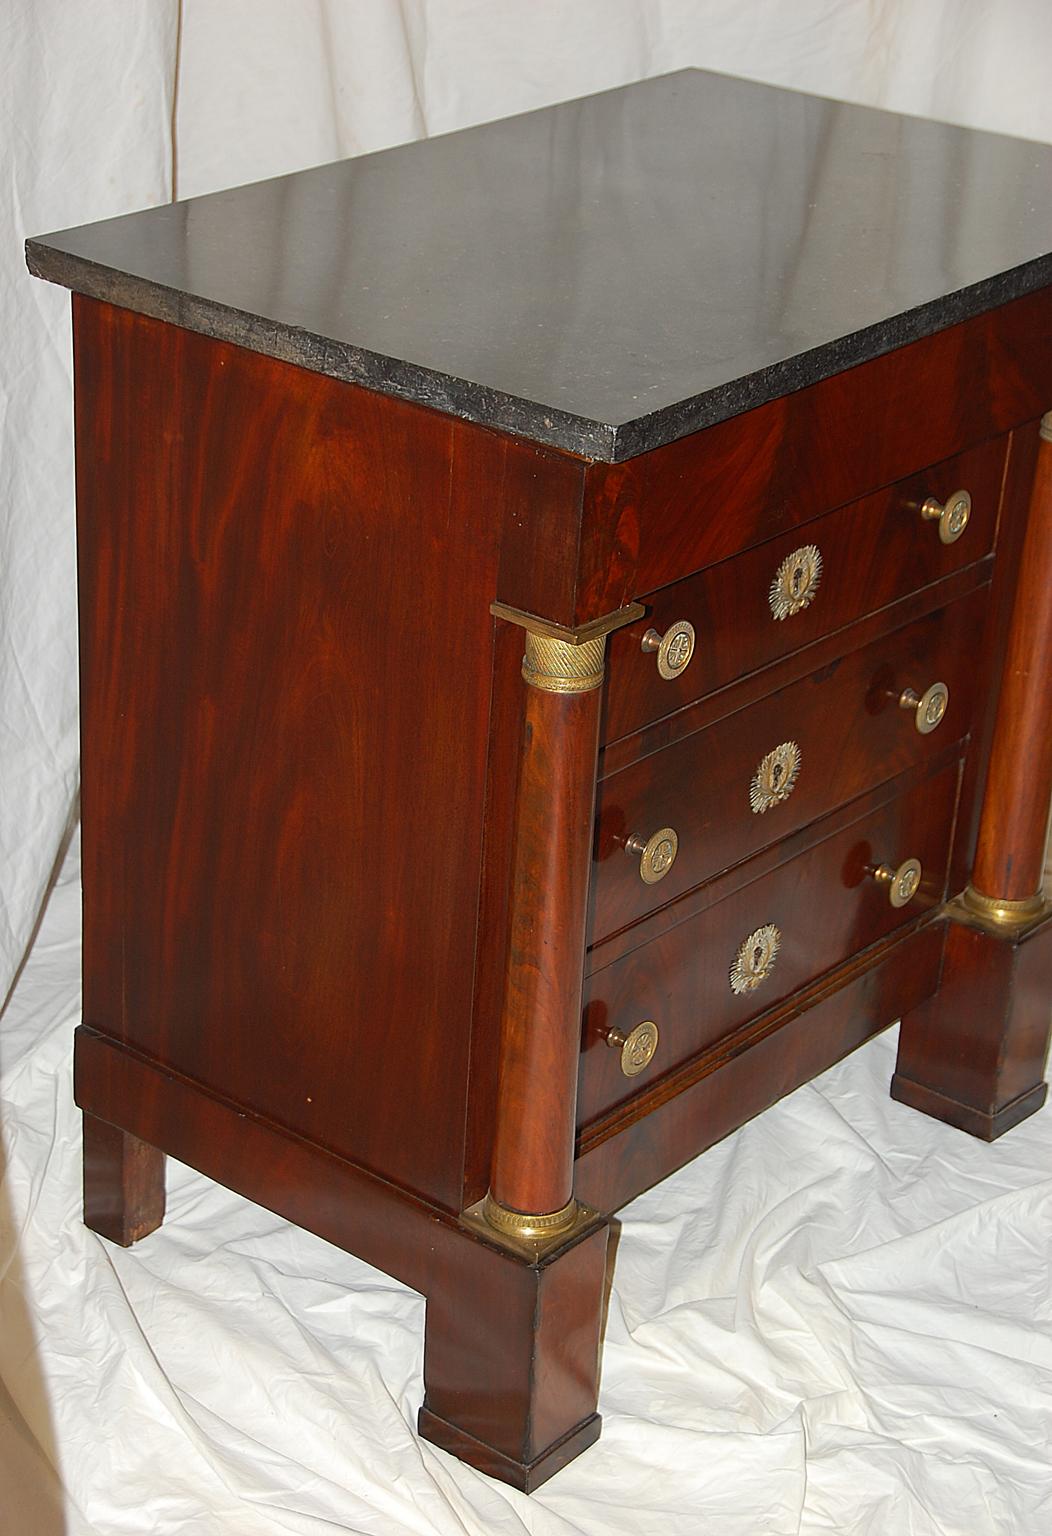 Empire Revival French Second Empire Period Mahogany Chest of Drawers with Marble Top Small Size